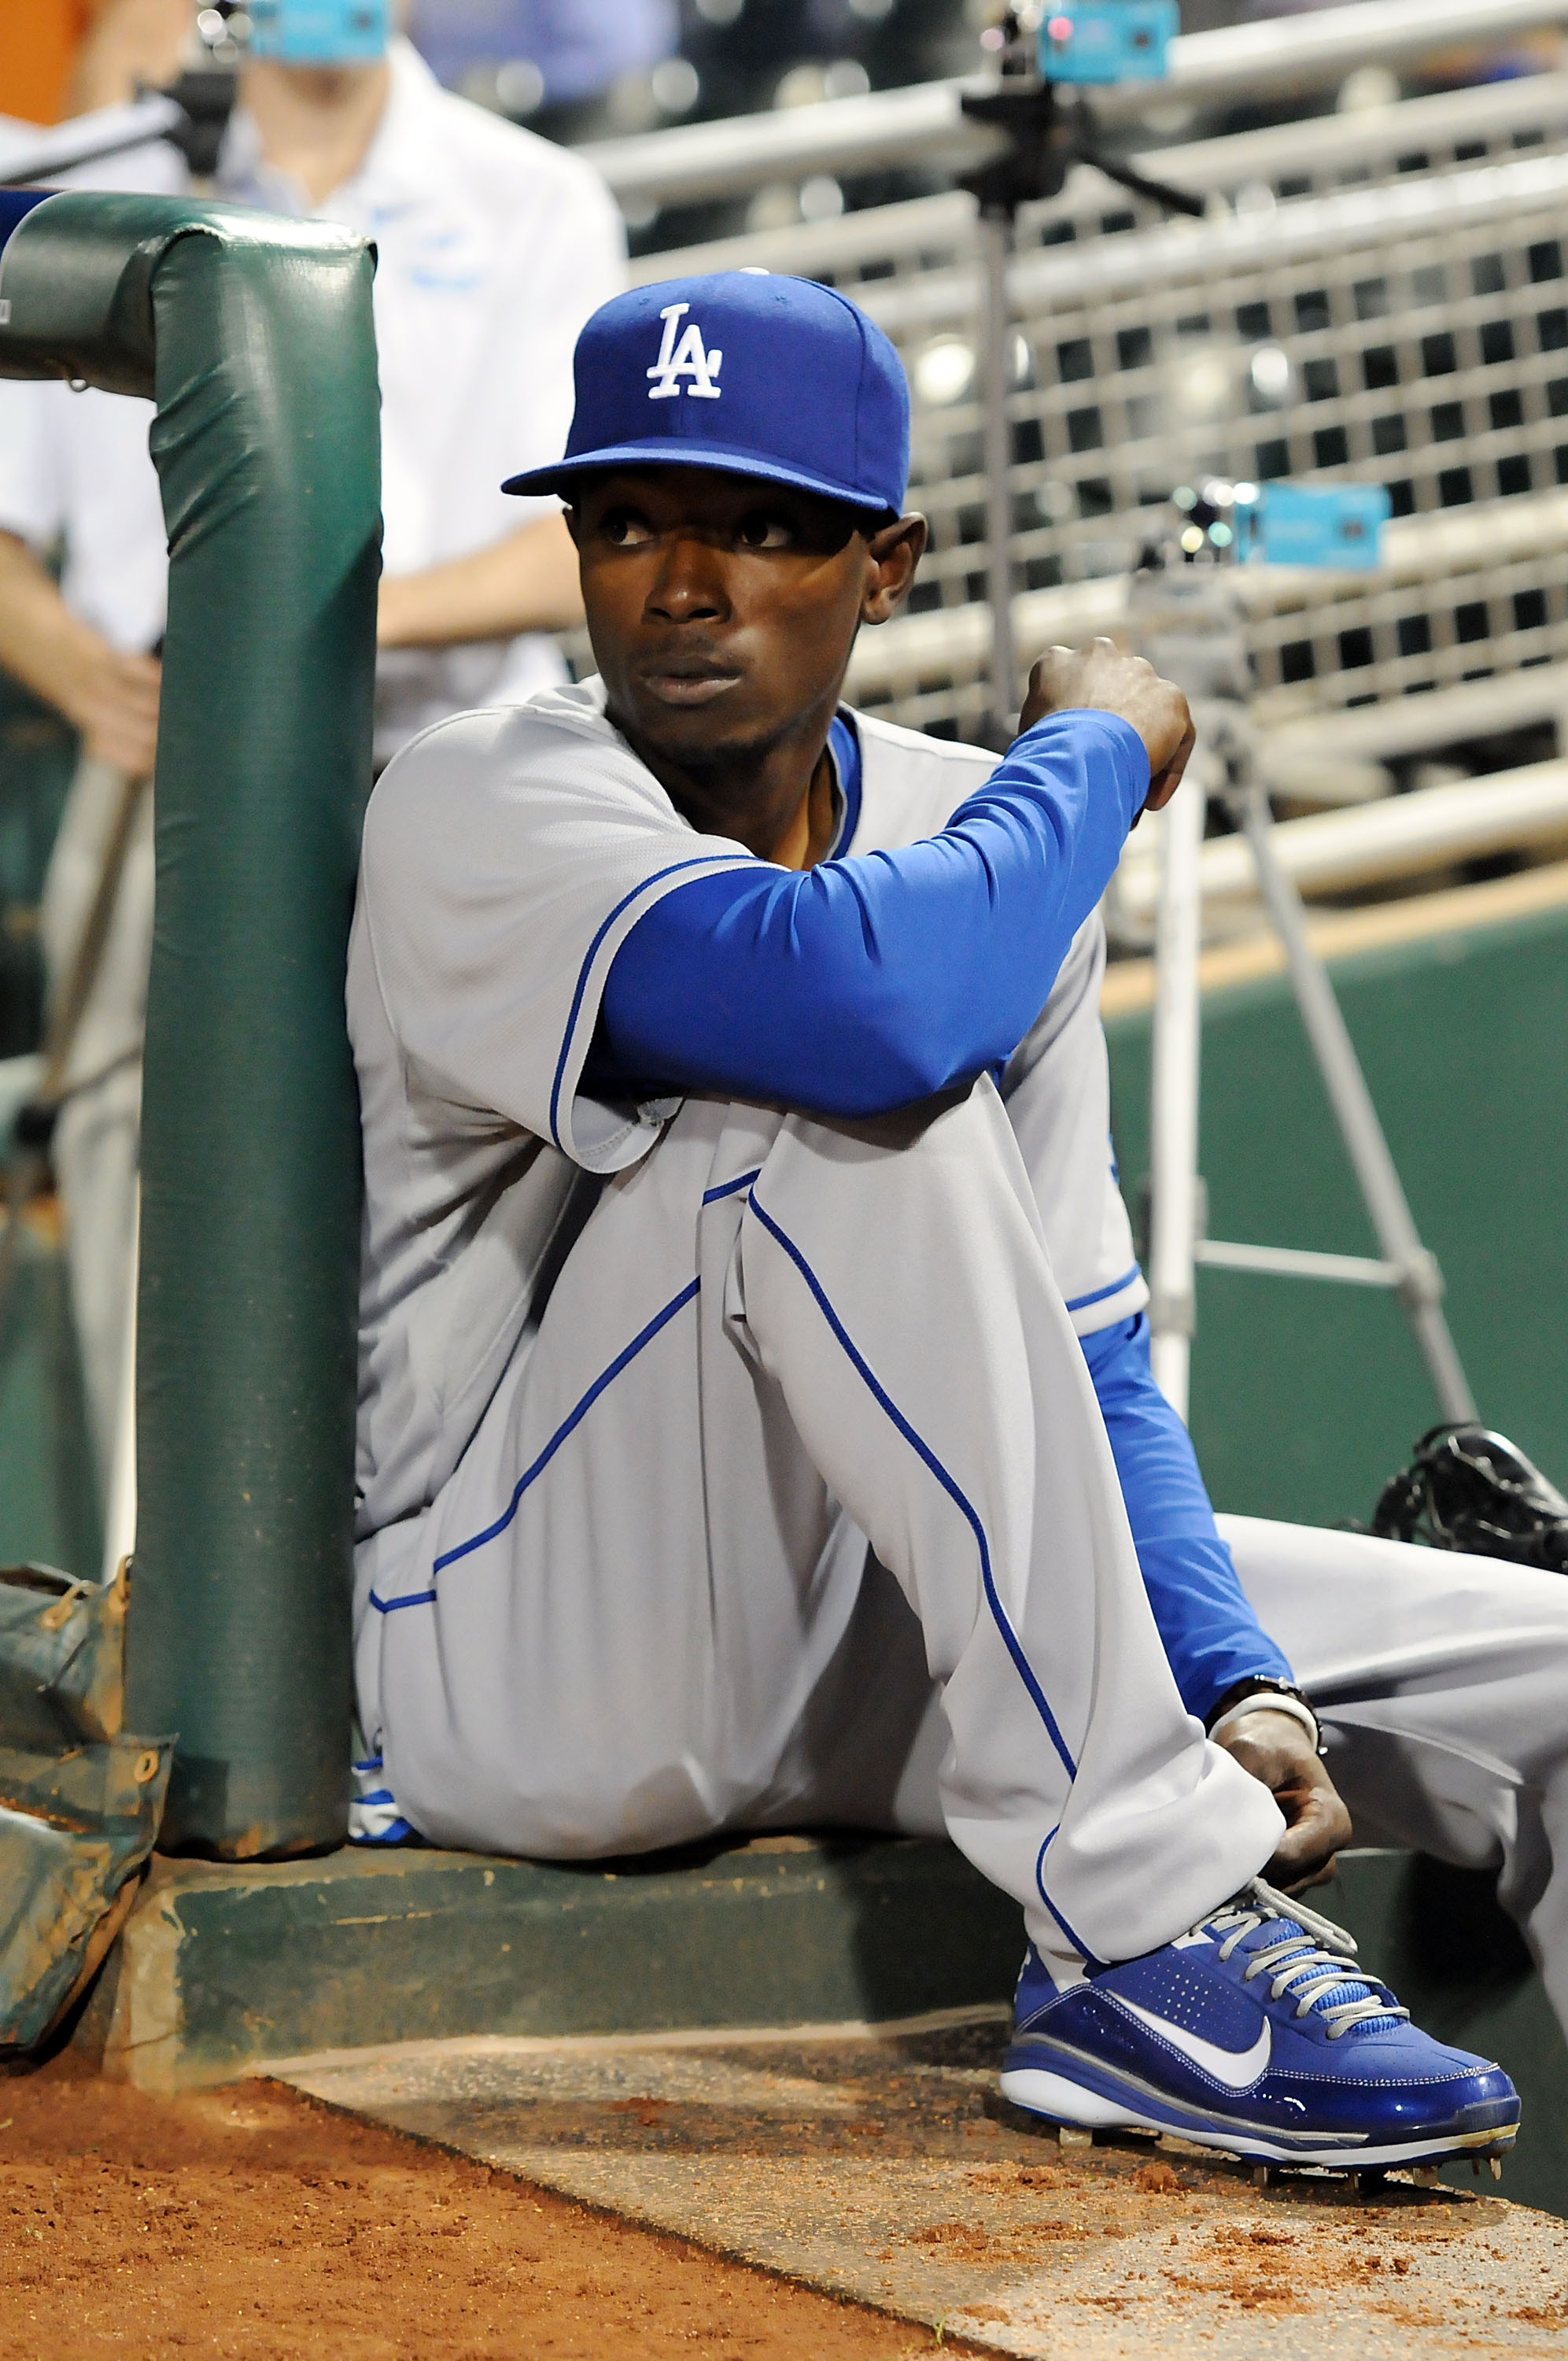 GOODYEAR, AZ - MARCH 03:  Dee Gordon #70 of the Los Angeles Dodgers watches his team take on the Cincinnati Reds from the bench at Goodyear Ballpark on March 3, 2011 in Goodyear, Arizona.  (Photo by Norm Hall/Getty Images)